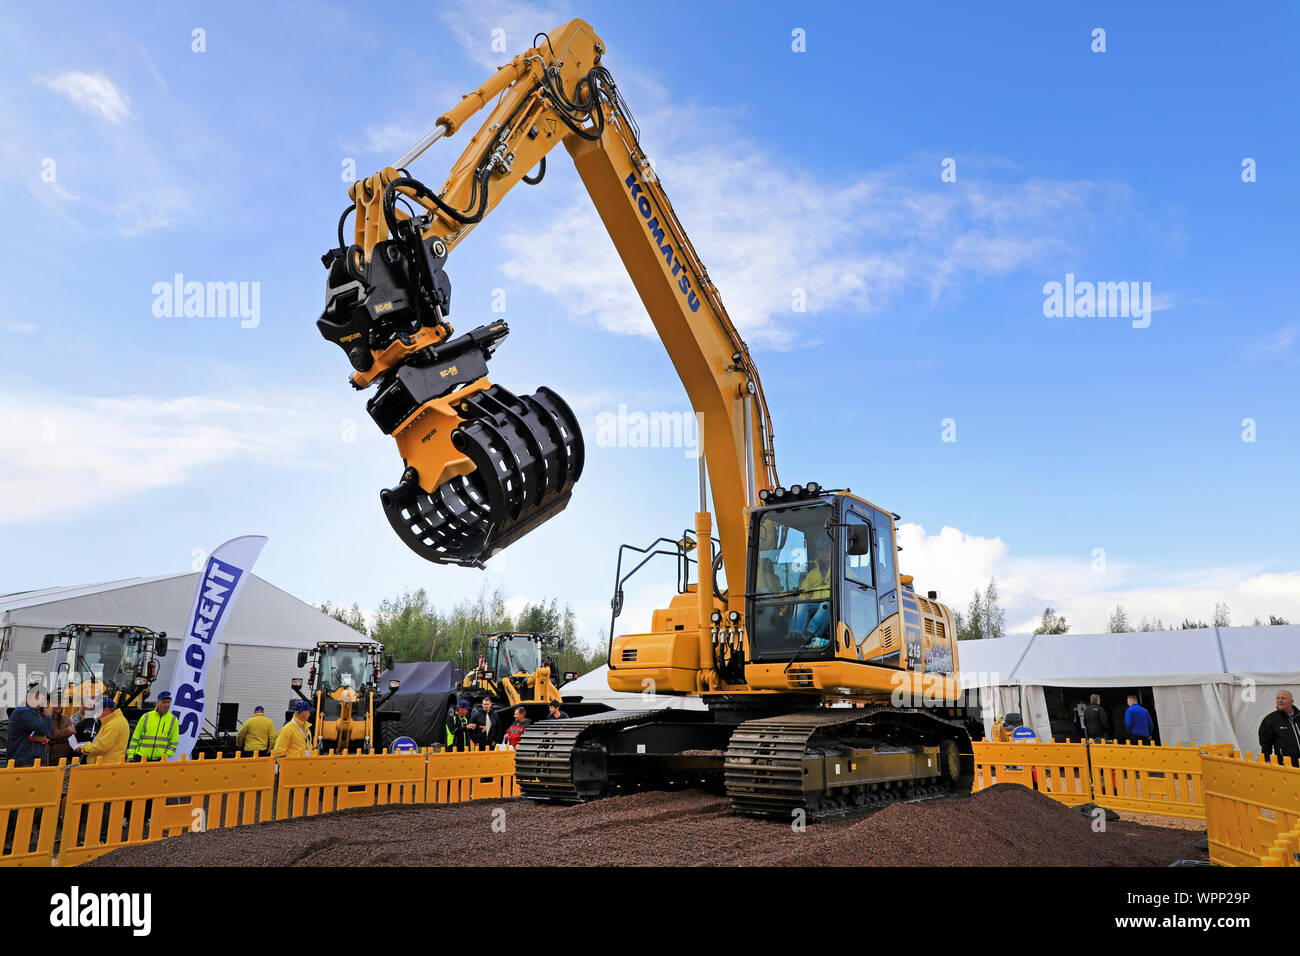 Hyvinkää, Finland. September 6, 2019. Komatsu HB 215 LC Hybrid excavator operator shows great precision by picking pack of cards with the grapple. Stock Photo